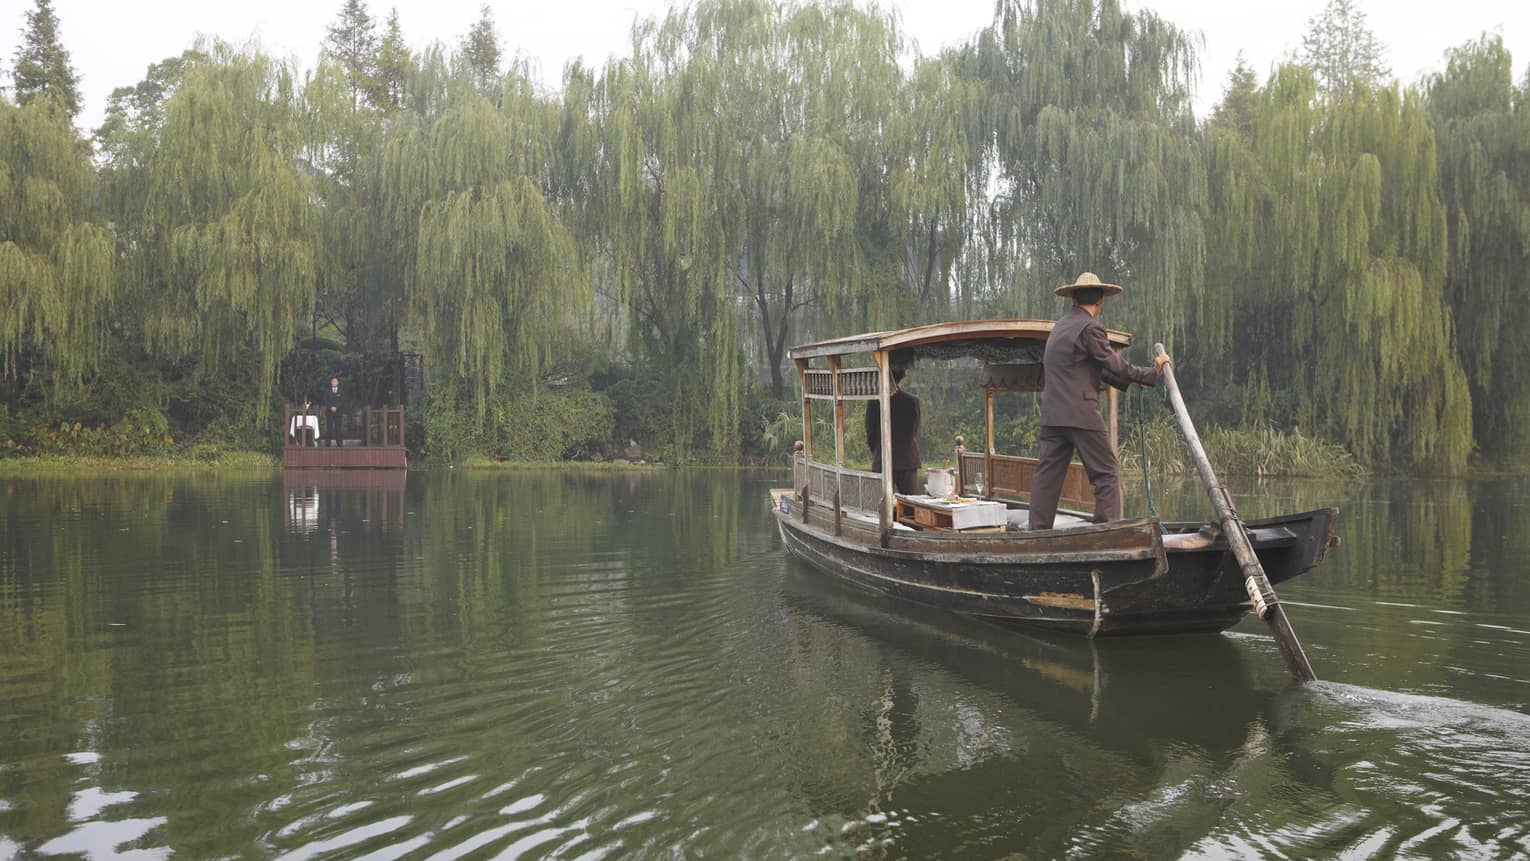 A guest arriving at a dock in Hangzhou, surrounded by weeping willows